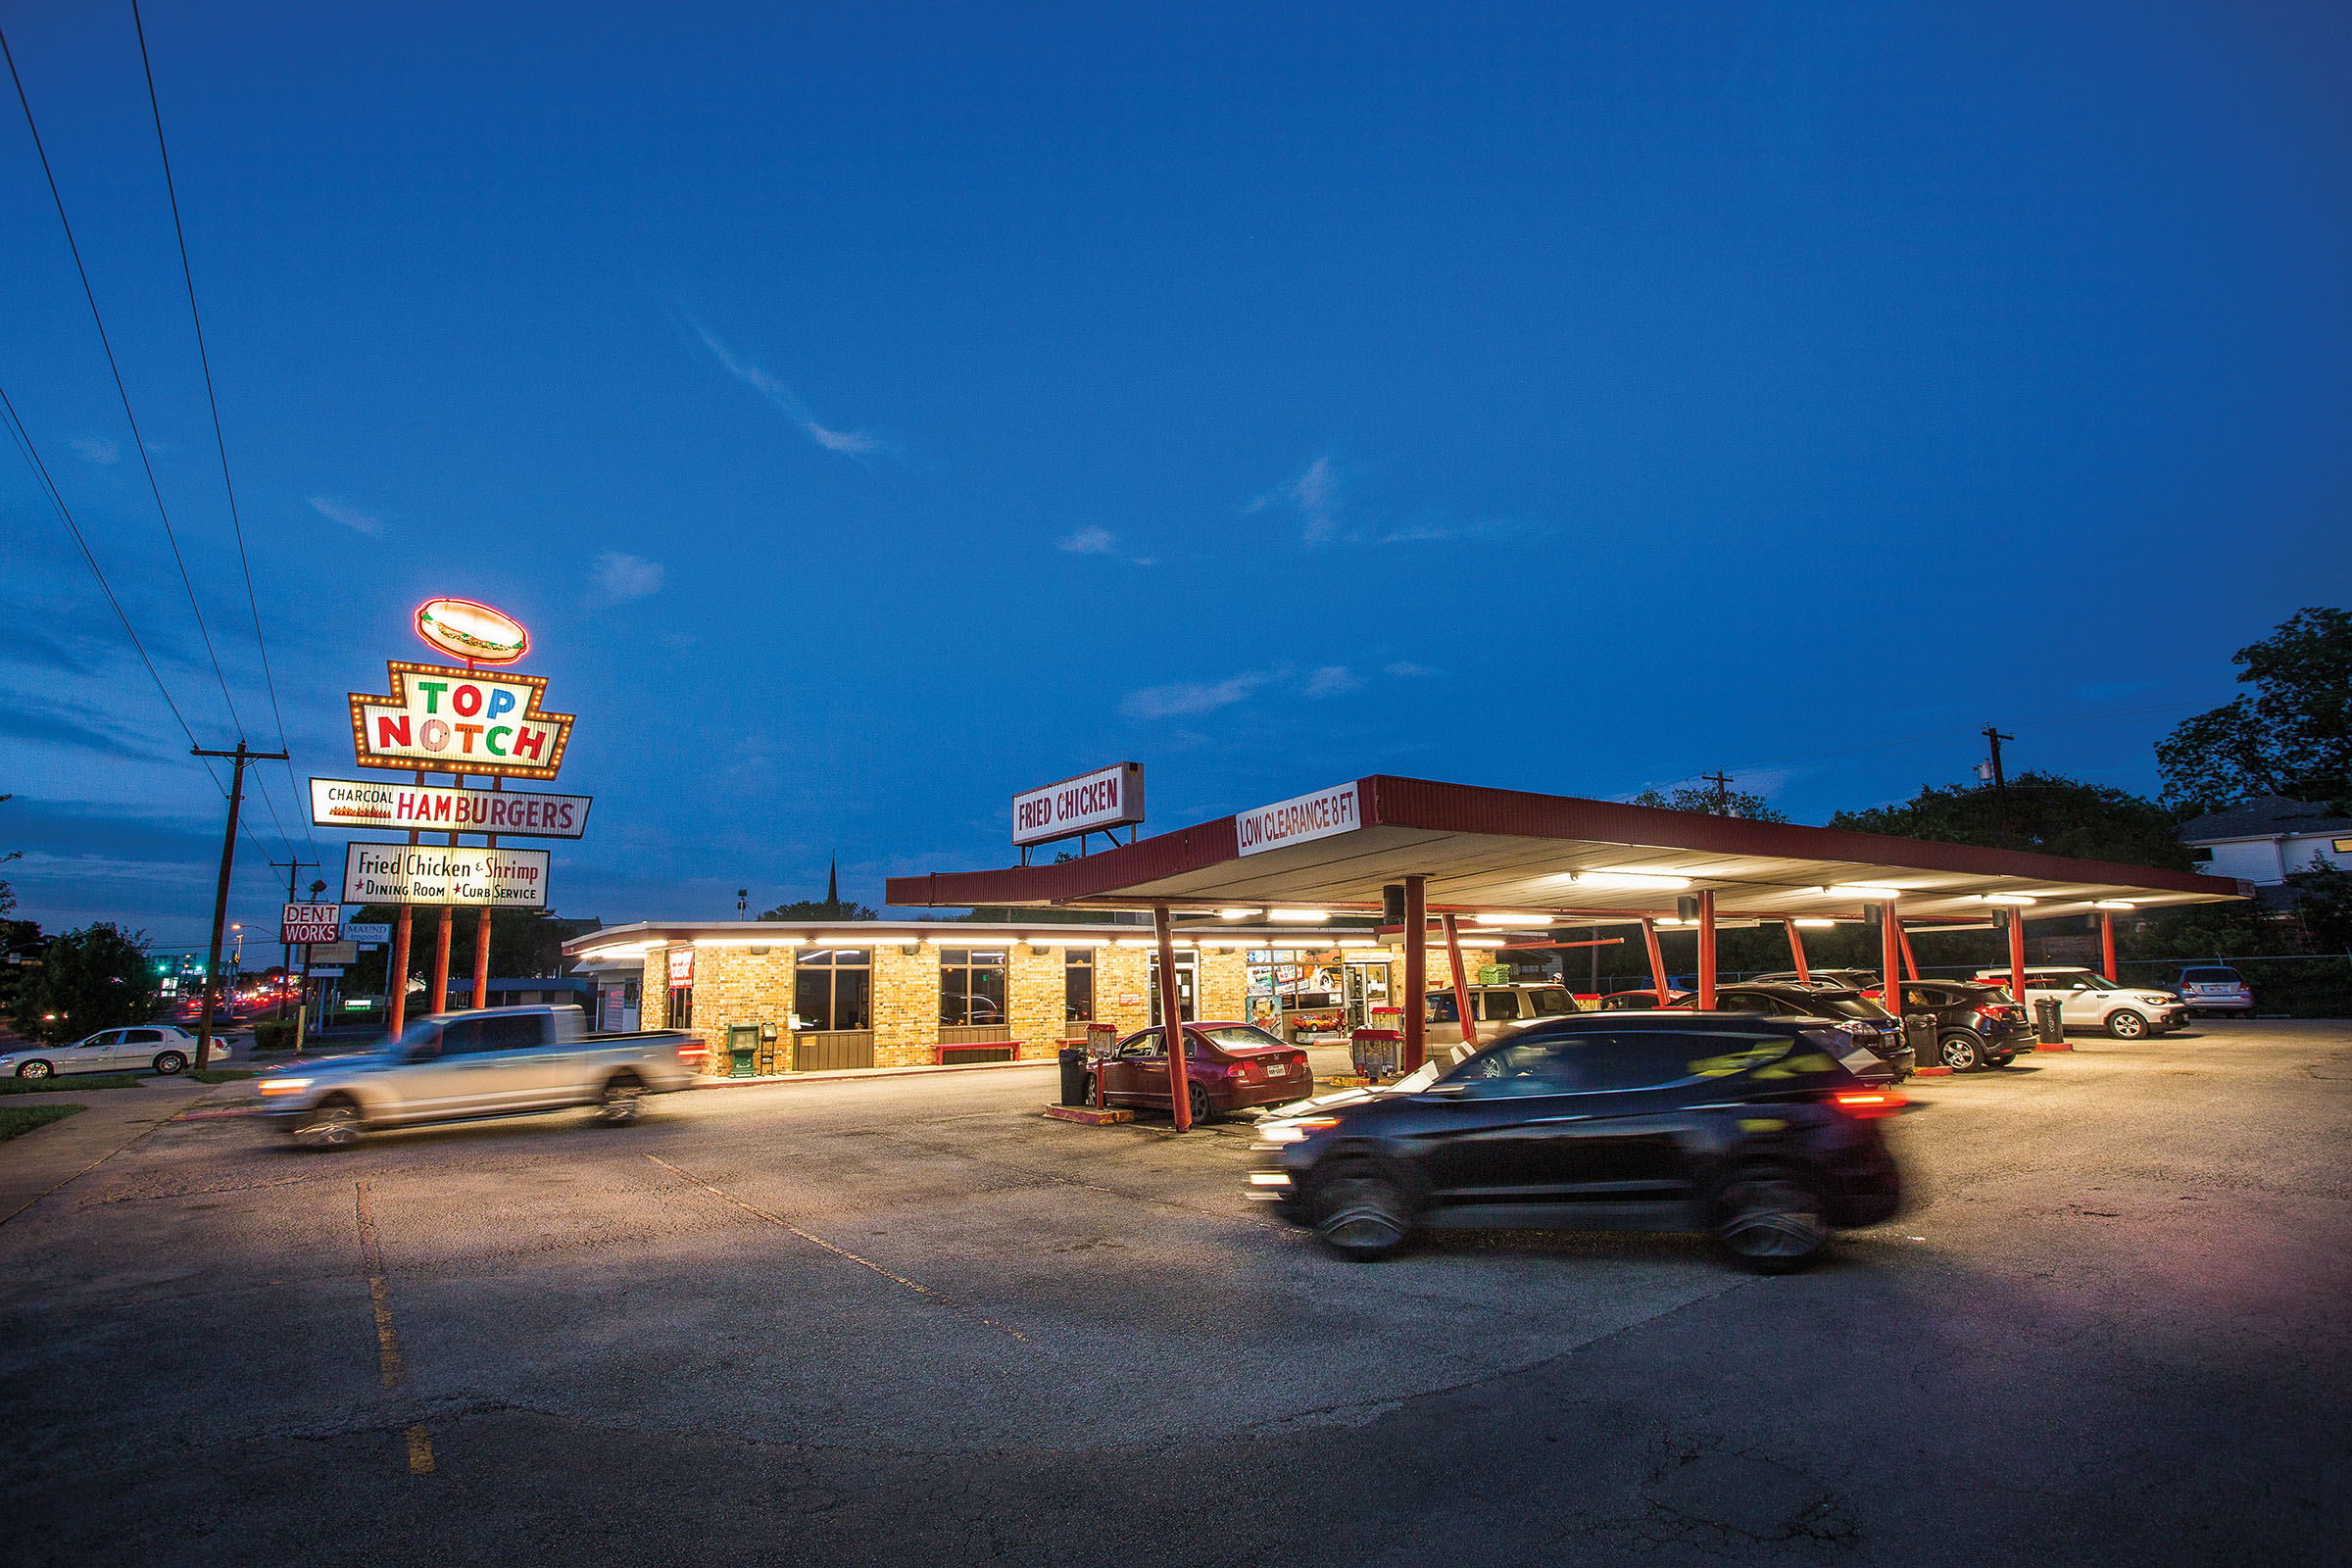 Cars drive in and out of a parking lot under a well-lit sign reading "Top Notch Hamburgers" at dusk